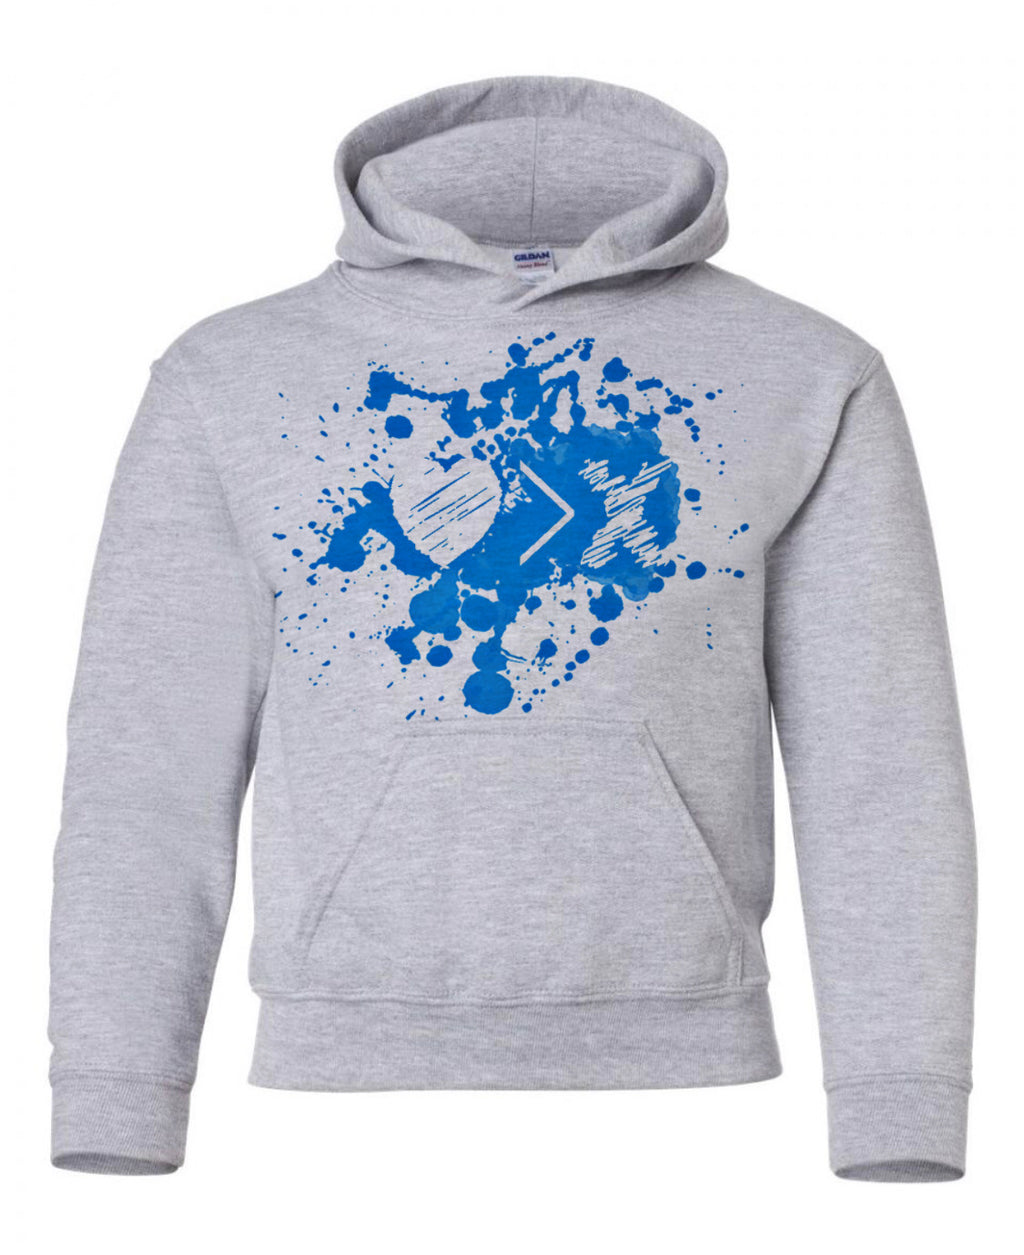 Grey/Blue Paint Splash Logo hoodie (Toddler and Youth)